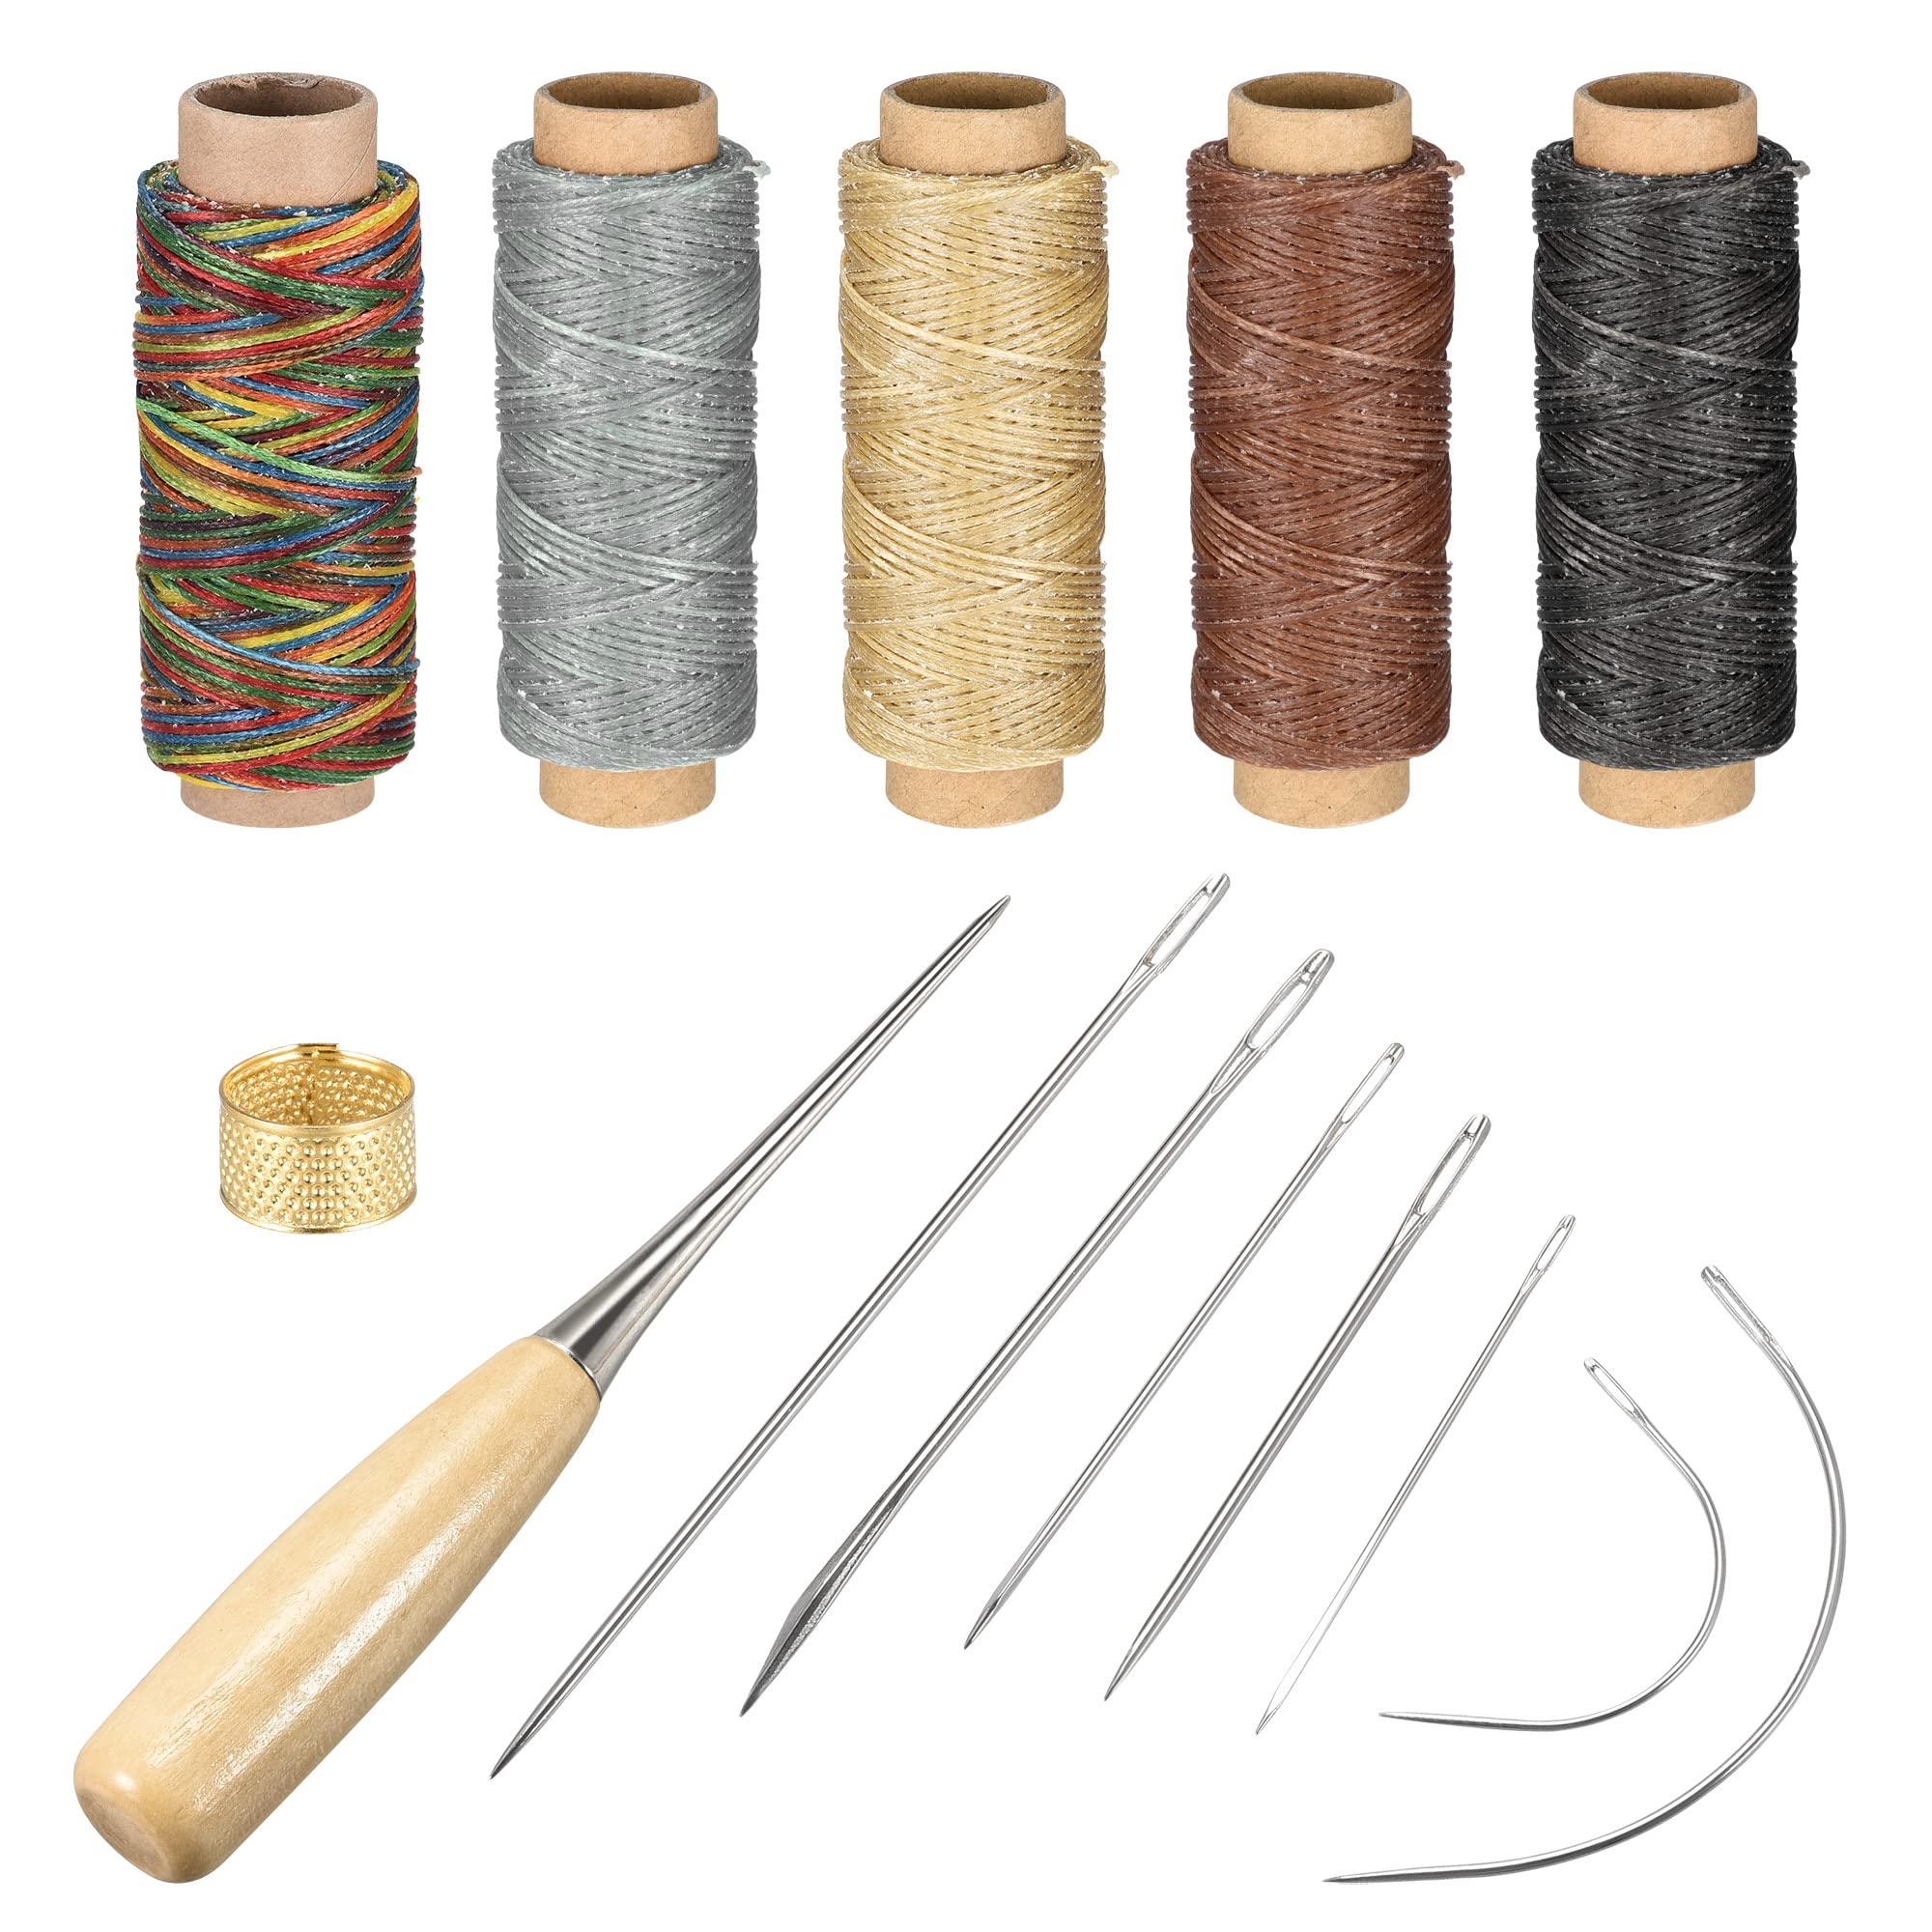 sourcing map Leather Sewing Threads Hand Stitching Tools Kit, Includes 5 Colors Waxed Flat Cord, Sewing Needles, Stitching Awl, Thimble.